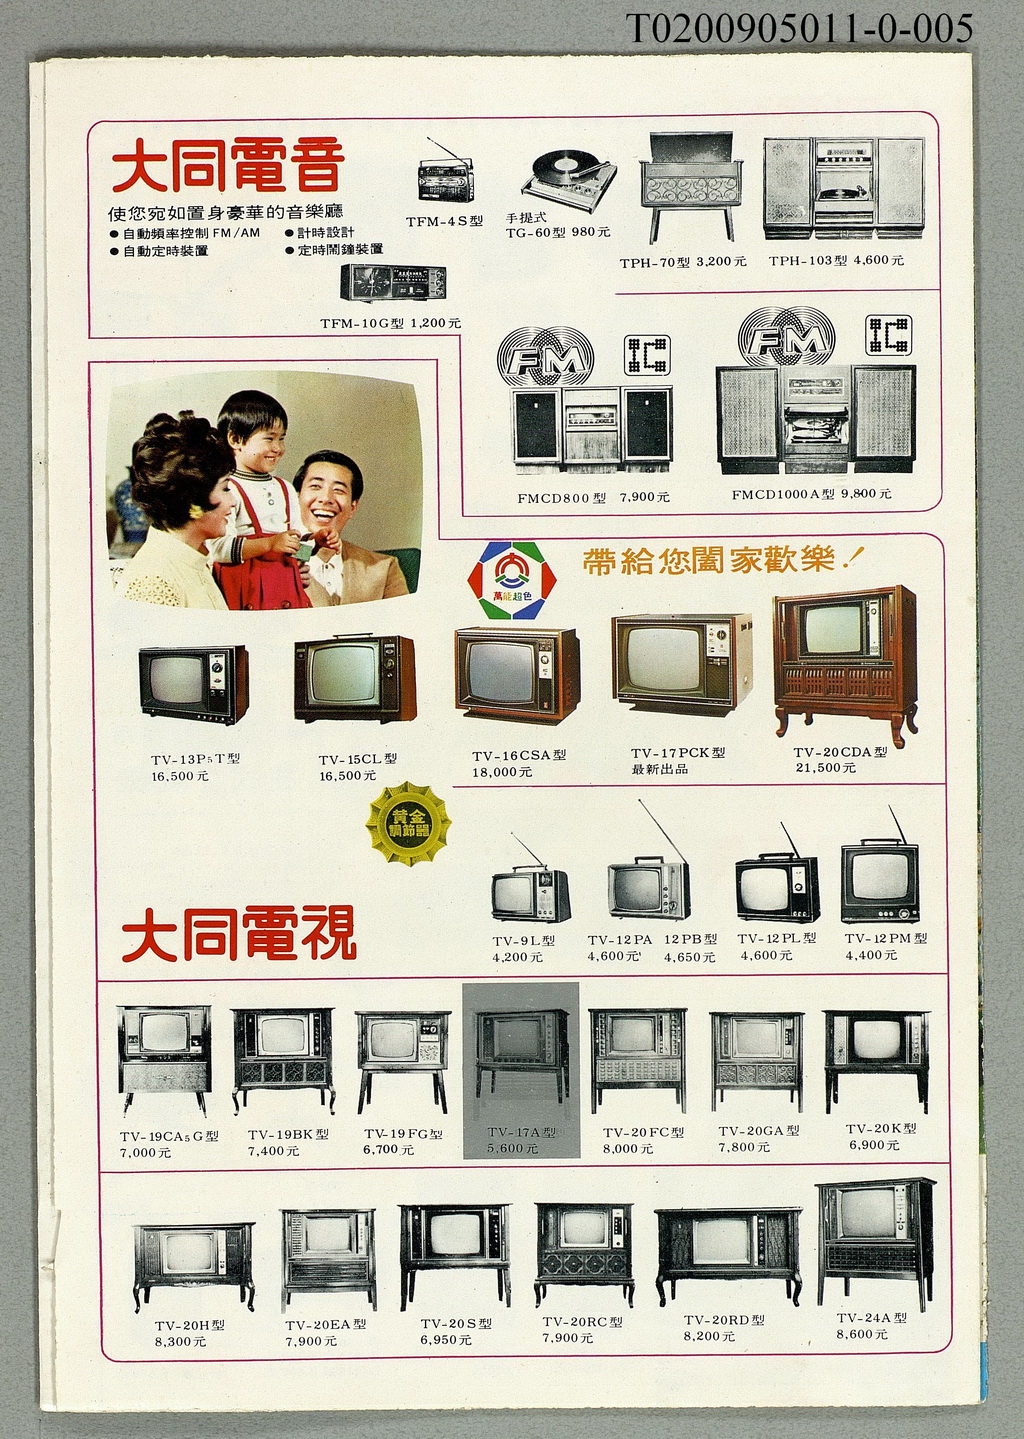 The 1972 Catalogue of Tatung Products